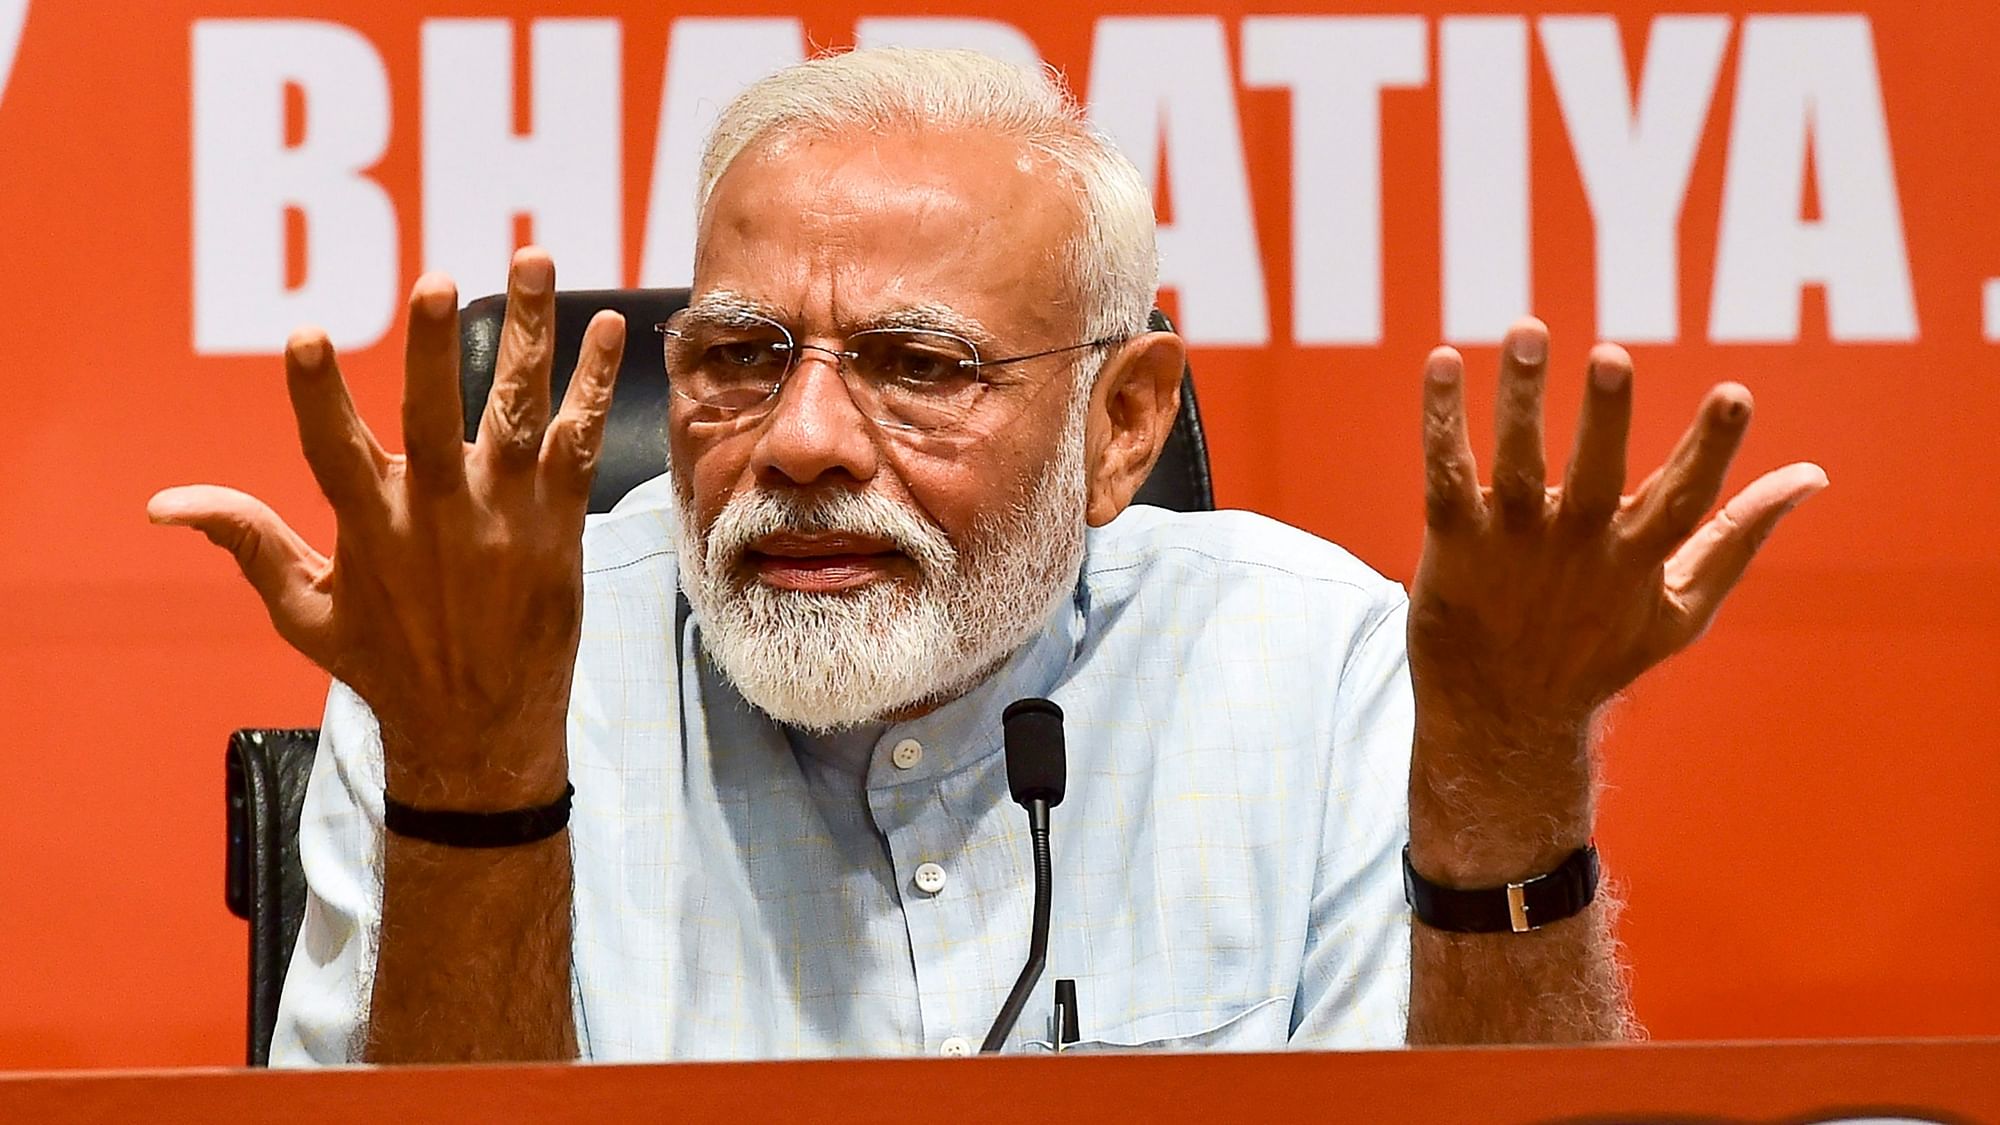 Prime Minister Narendra Modi addressed a press conference on Friday, 17 May, with BJP President Amit Shah.